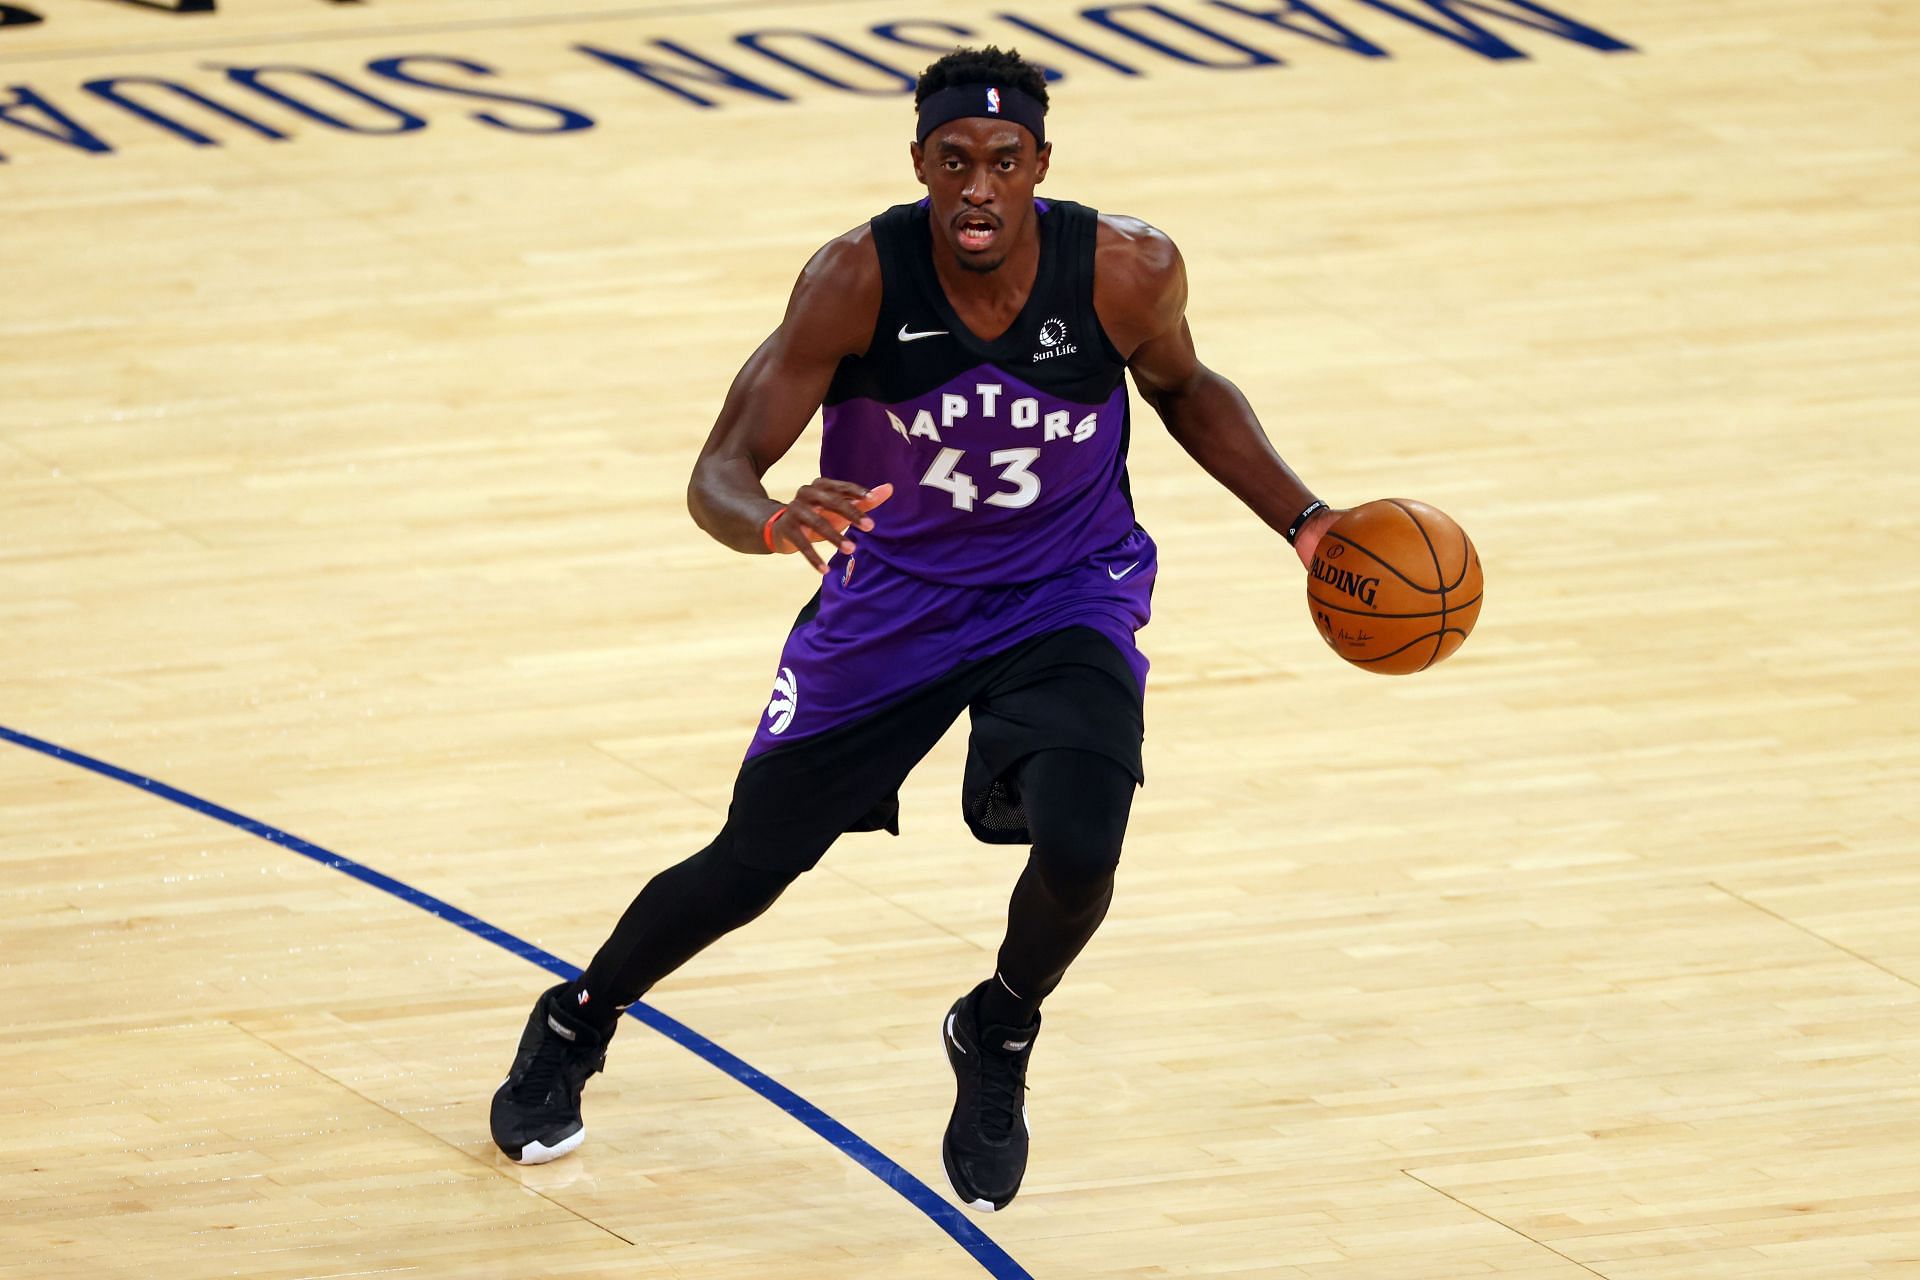 Pascal Siakam could make his season debut on Sunday against the Brooklyn Nets.